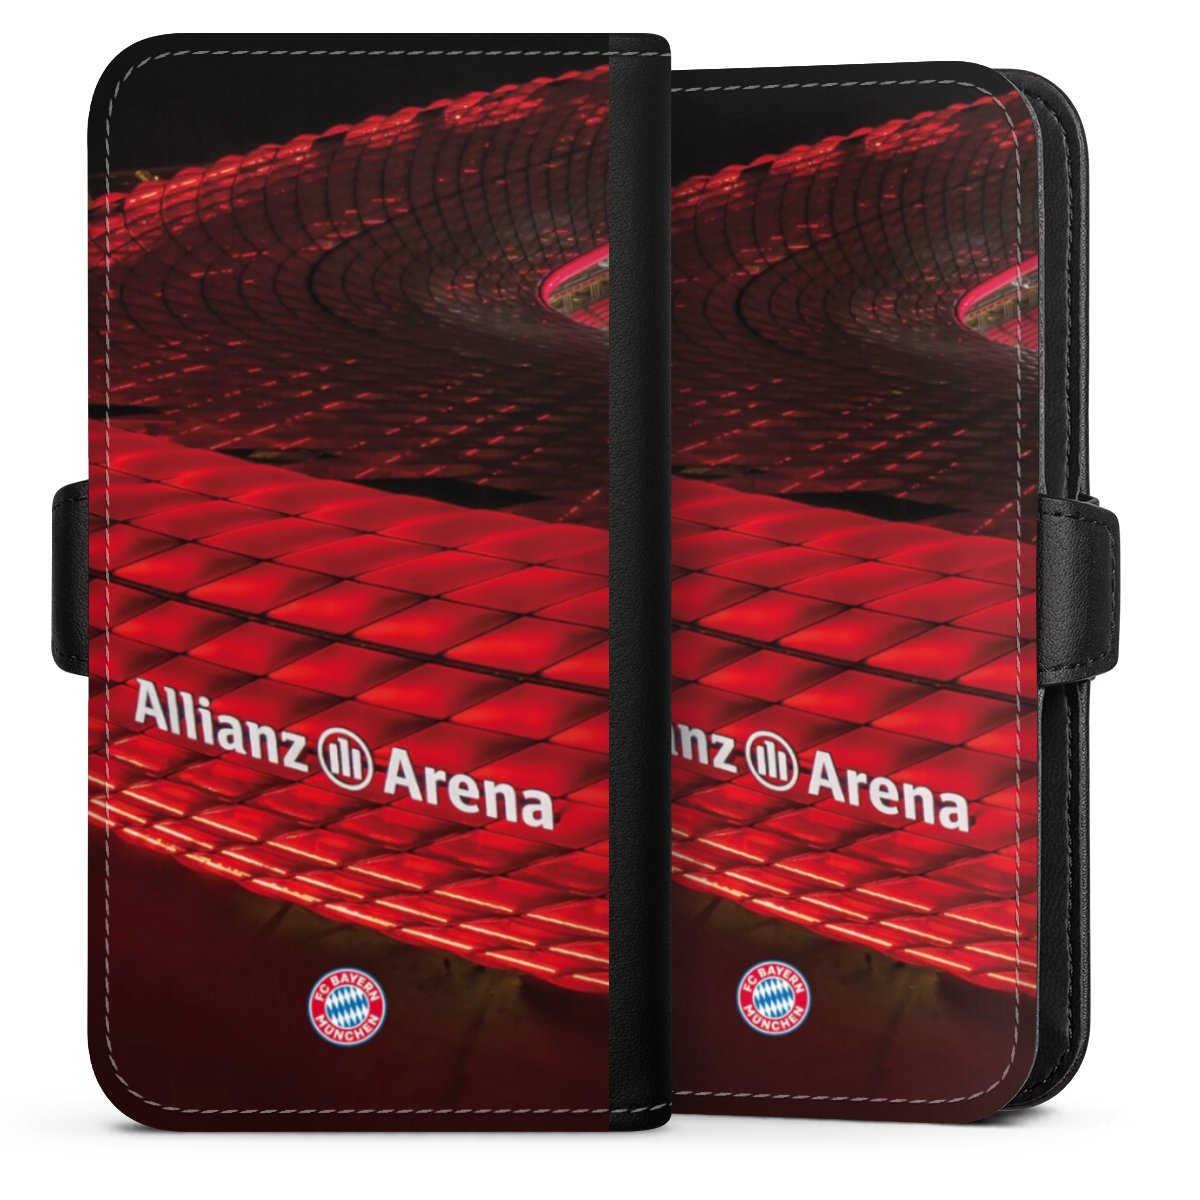 Allianz Arena by Night